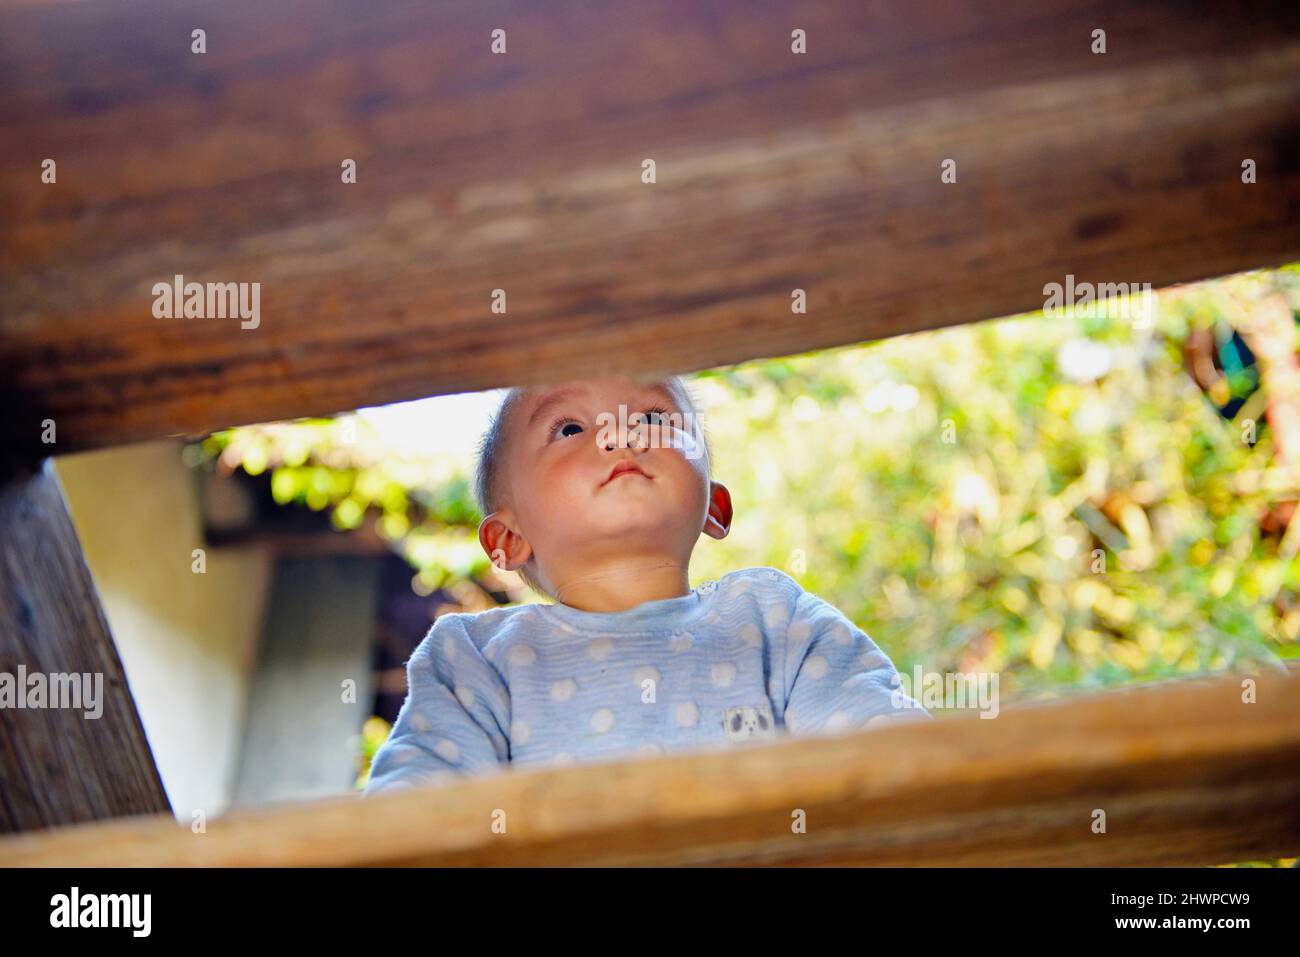 Hezhou, Hezhou, China. 7th Mar, 2022. On March 5, a young boy played in a Hakka Round House in Rinchong Village, Liantang Town, Babu District, Hezhou City.Jiang's ancestral house, located in Rinchong Village, Liantang Town, Babu District, Hezhou City, Guangxi Province, was built in the Qing Dynasty and has a history of more than 200 years. It is a typical Hakka Round House in East Guizhou. The Round House covers an area of more than 30 acres. The building is a square symmetrical structure, surrounded by a 3-meter-high wall and separated from the outside world. The layout of the buildings, ha Stock Photo